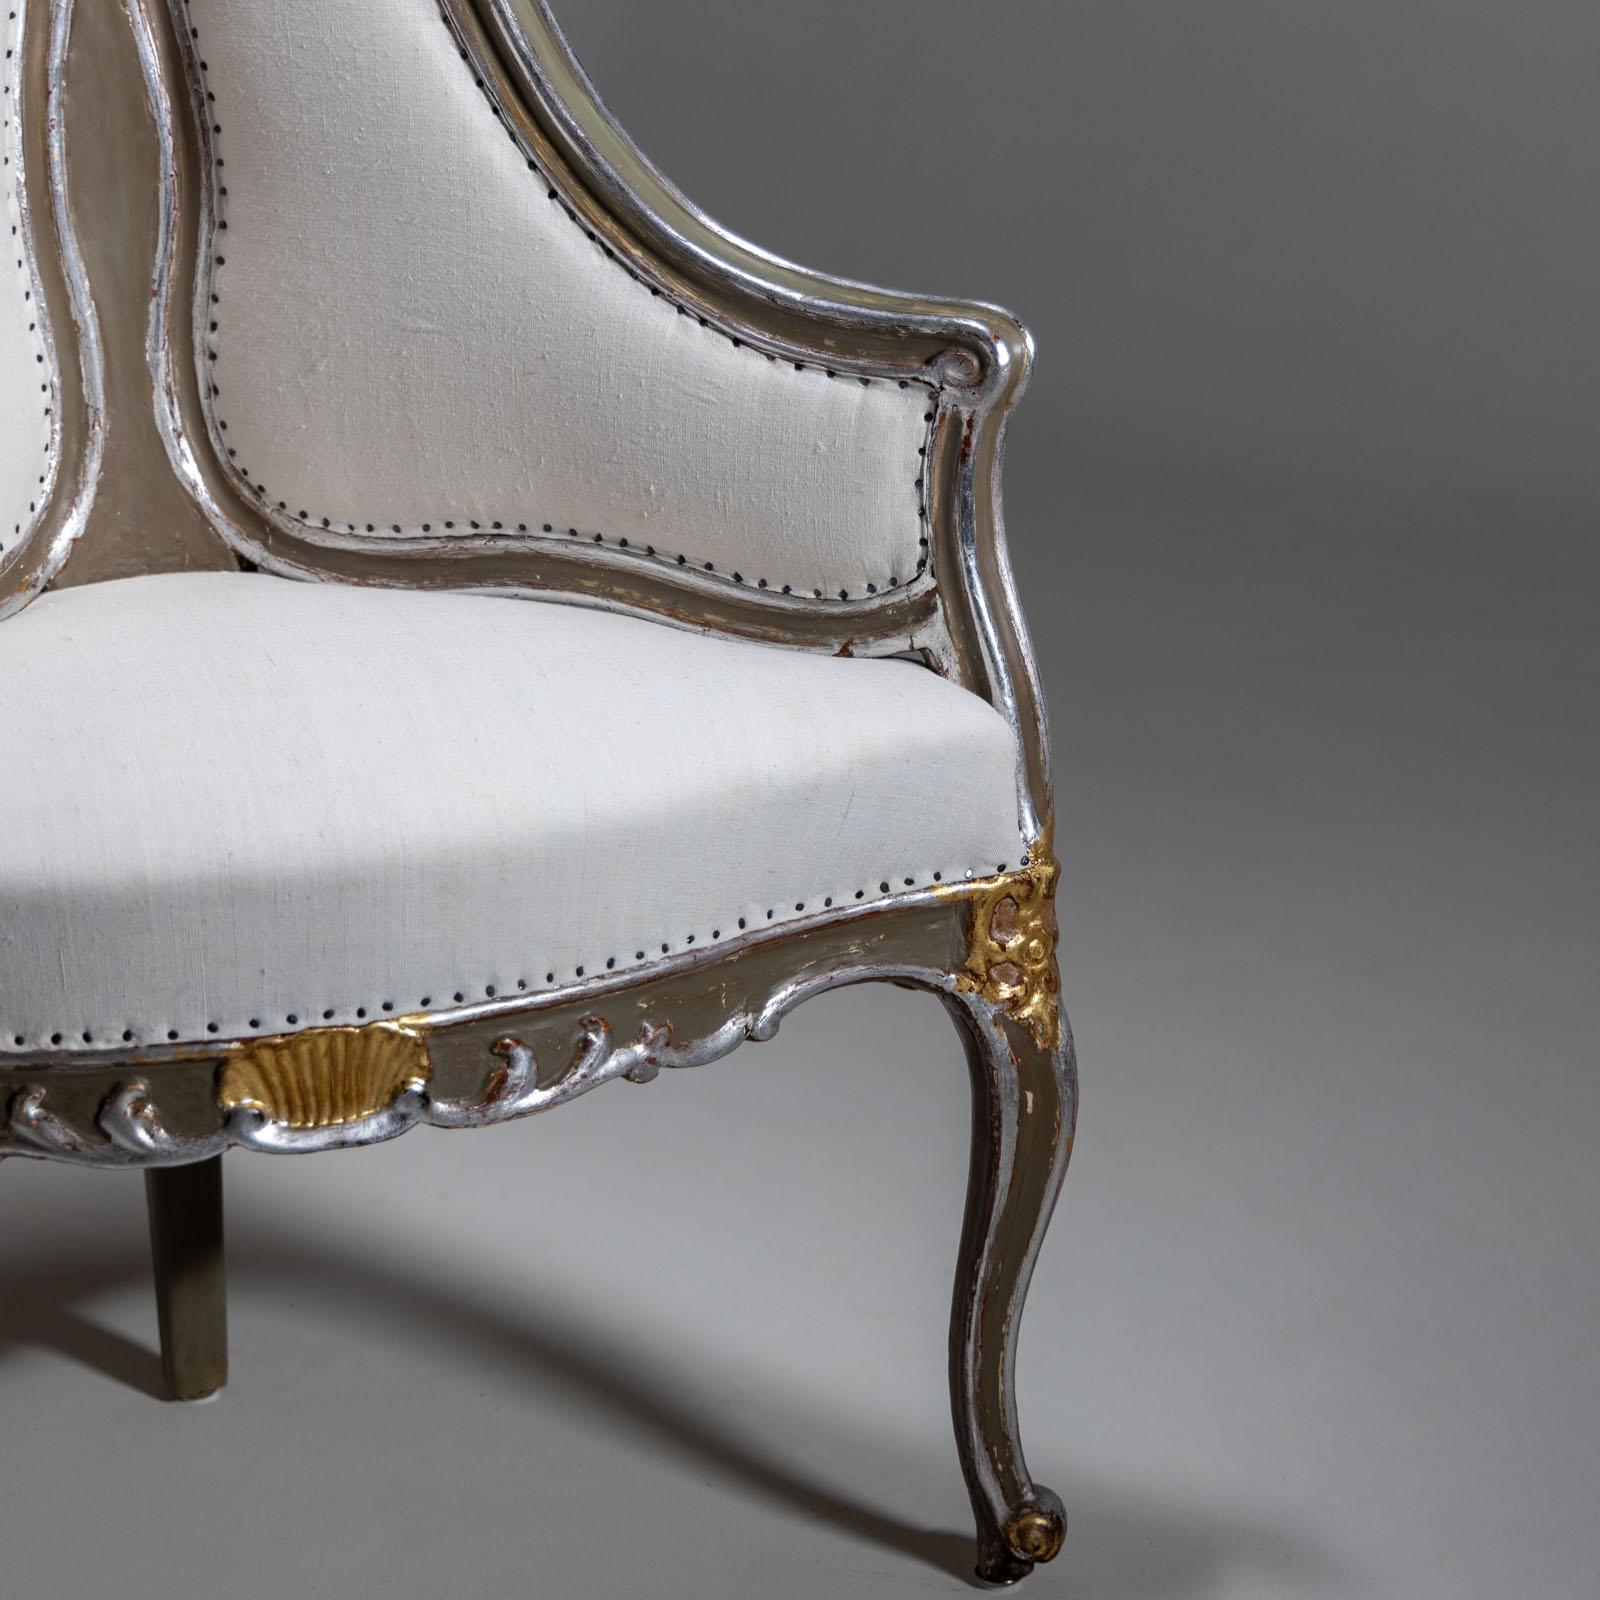 Painted Upholstered Corner armchair in baroque style, 19th century